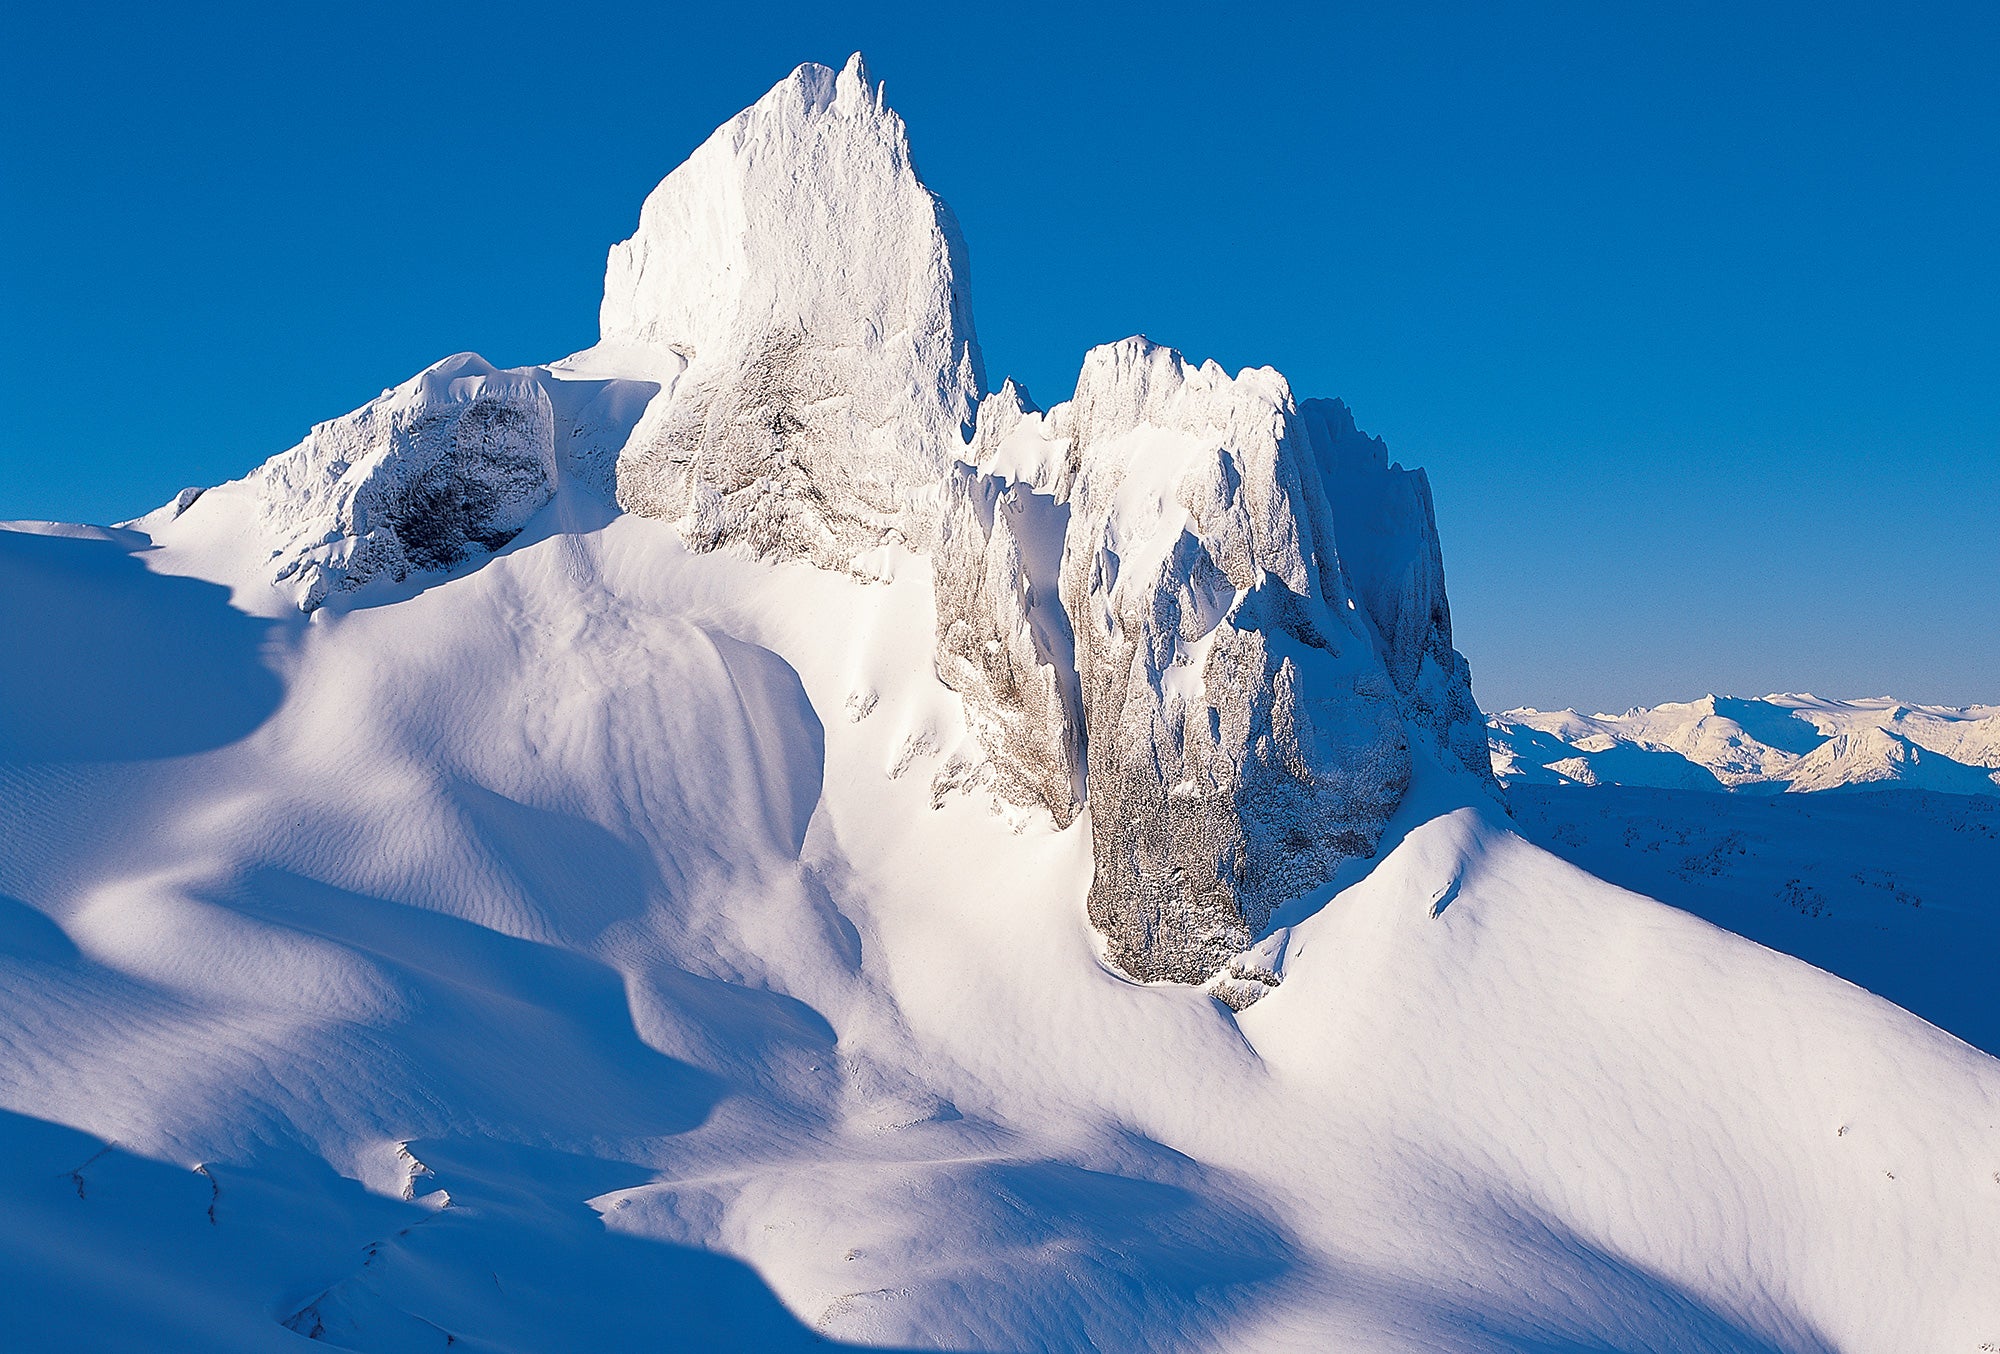 A jagged peak juts out from thick snowy slopes. End of image description.